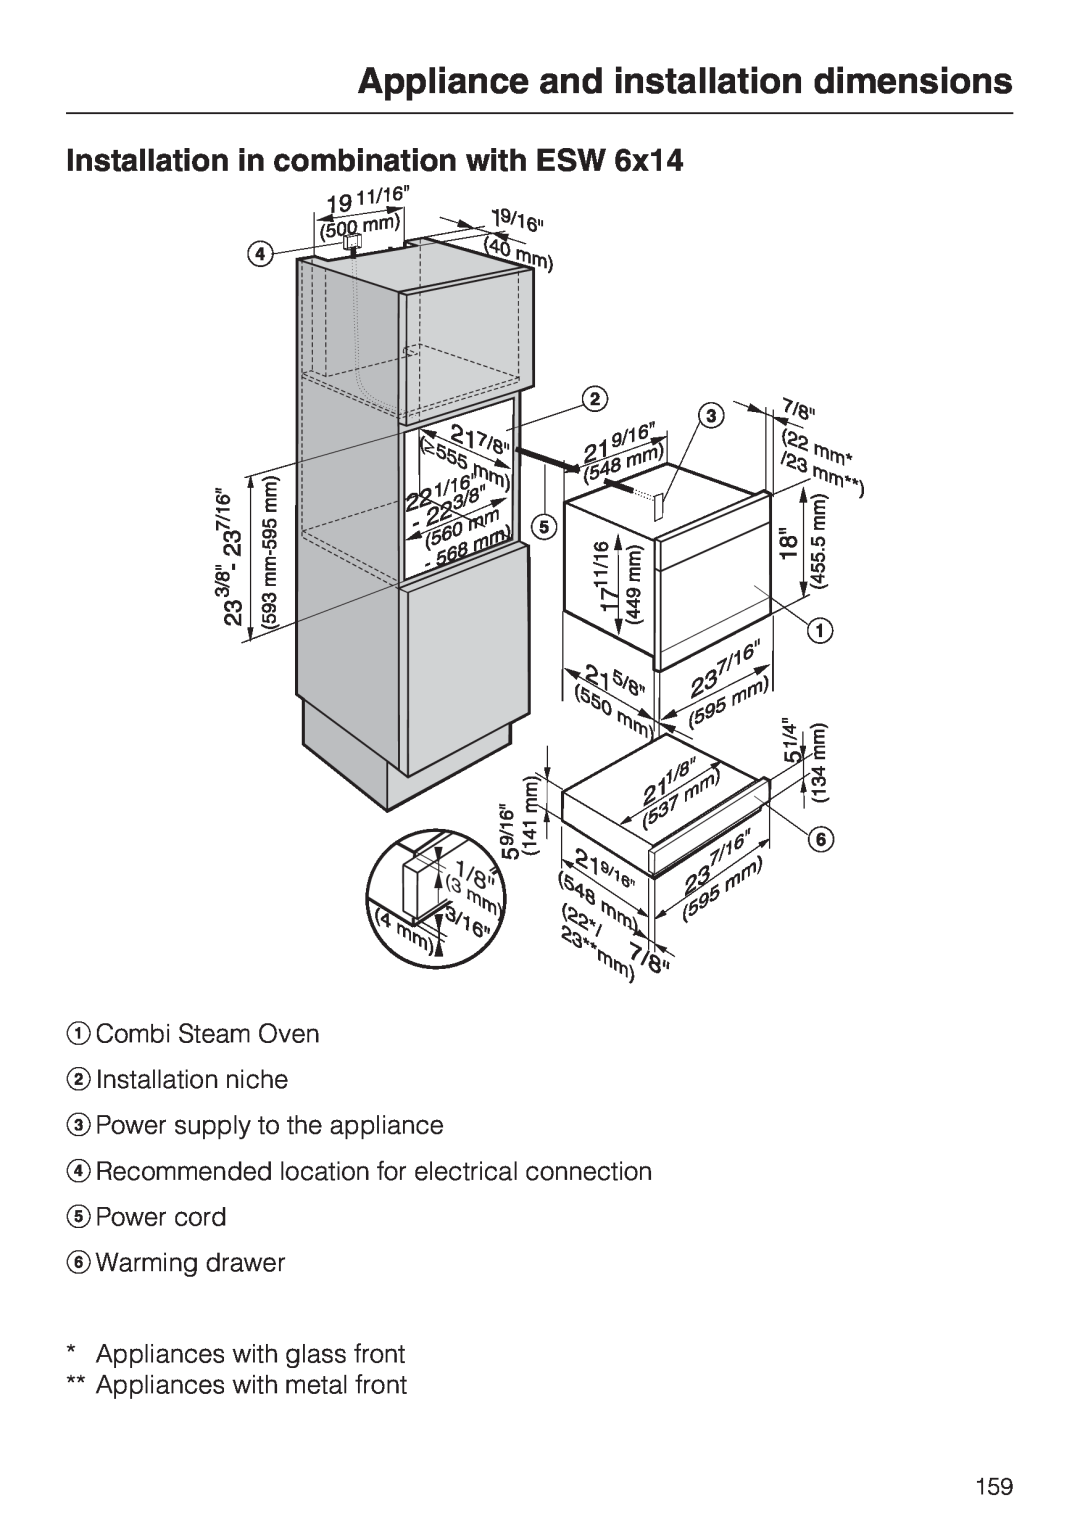 Miele 09 855 050 Installation in combination with ESW, Appliance and installation dimensions, Power cord Warming drawer 